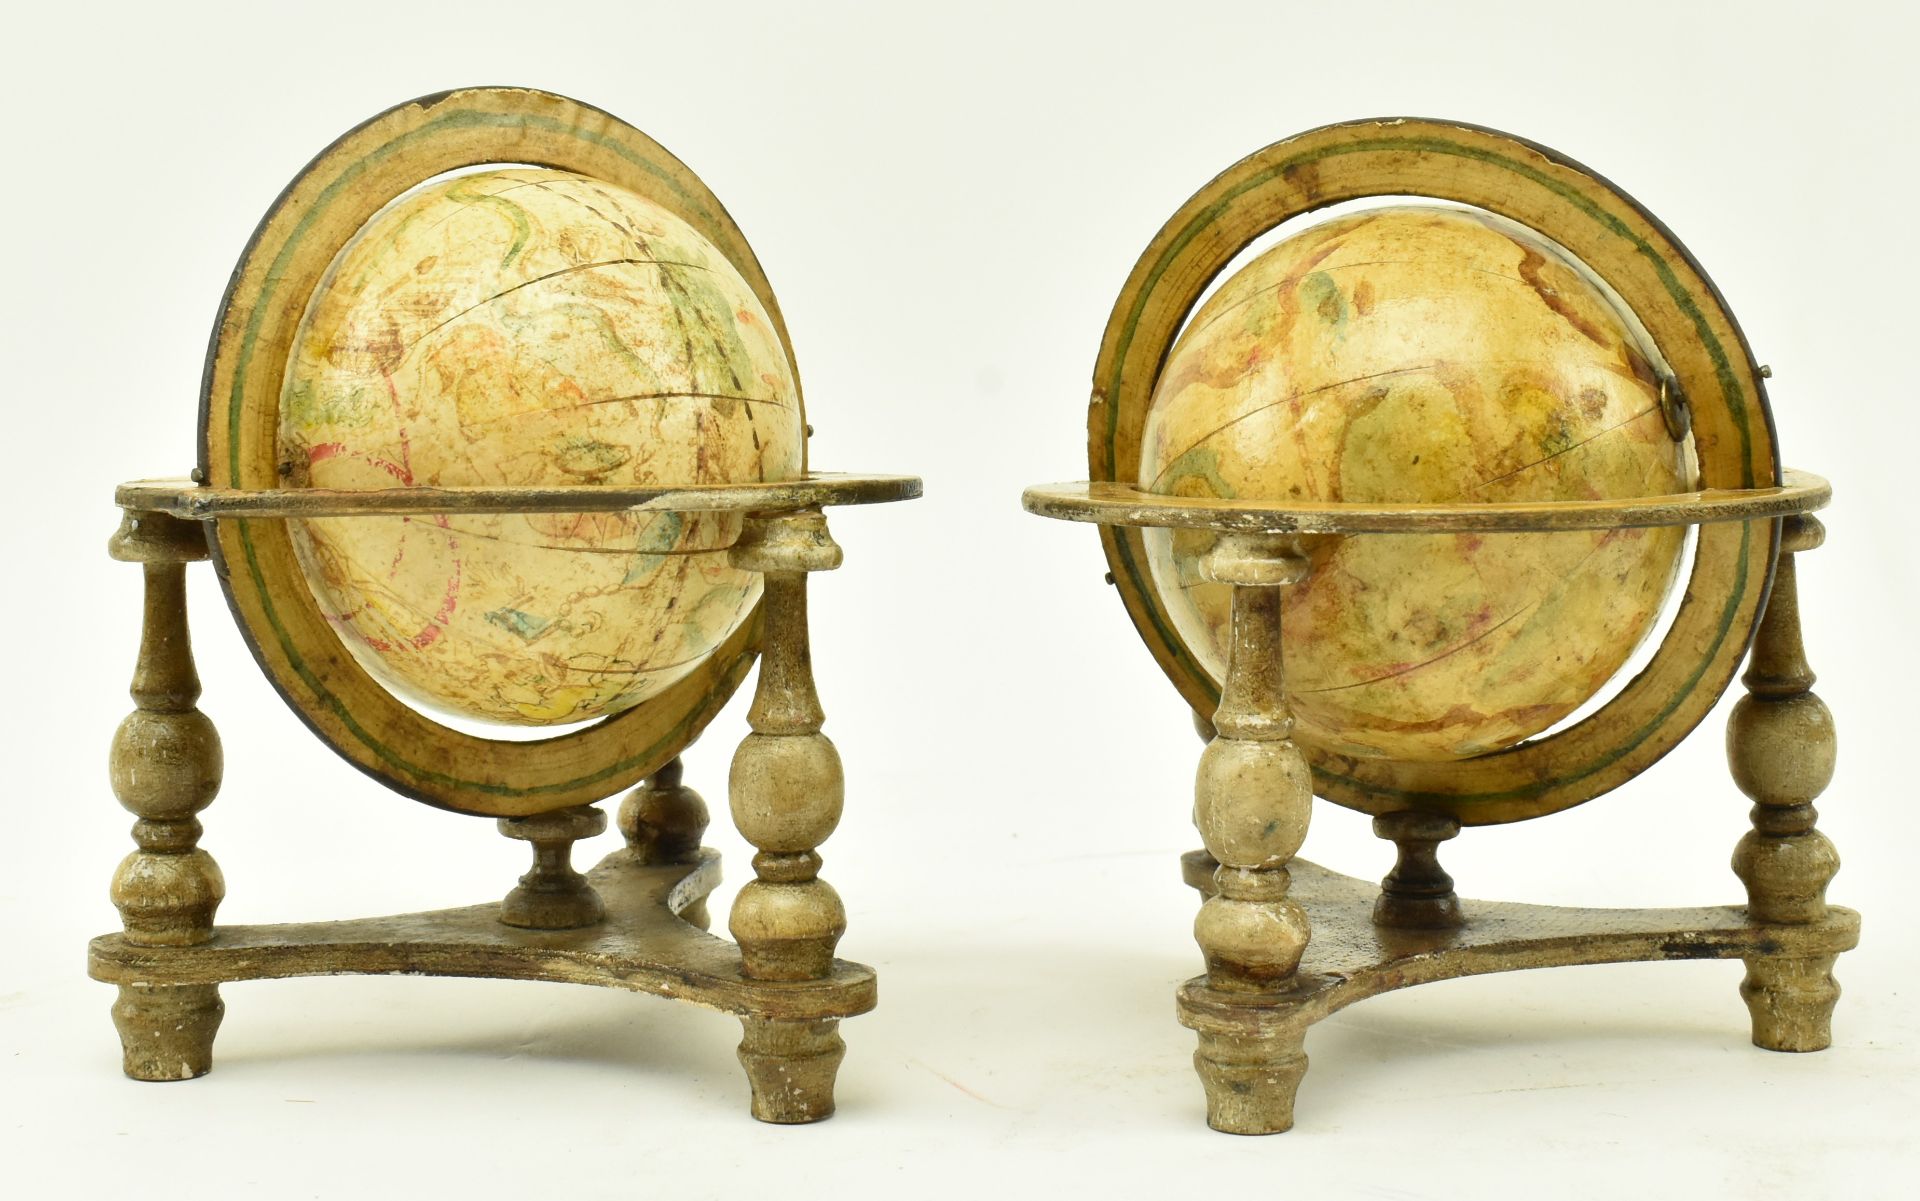 PAIR OF EARLY 20TH CENTURY METAL & WOOD CELESTIAL GLOBES